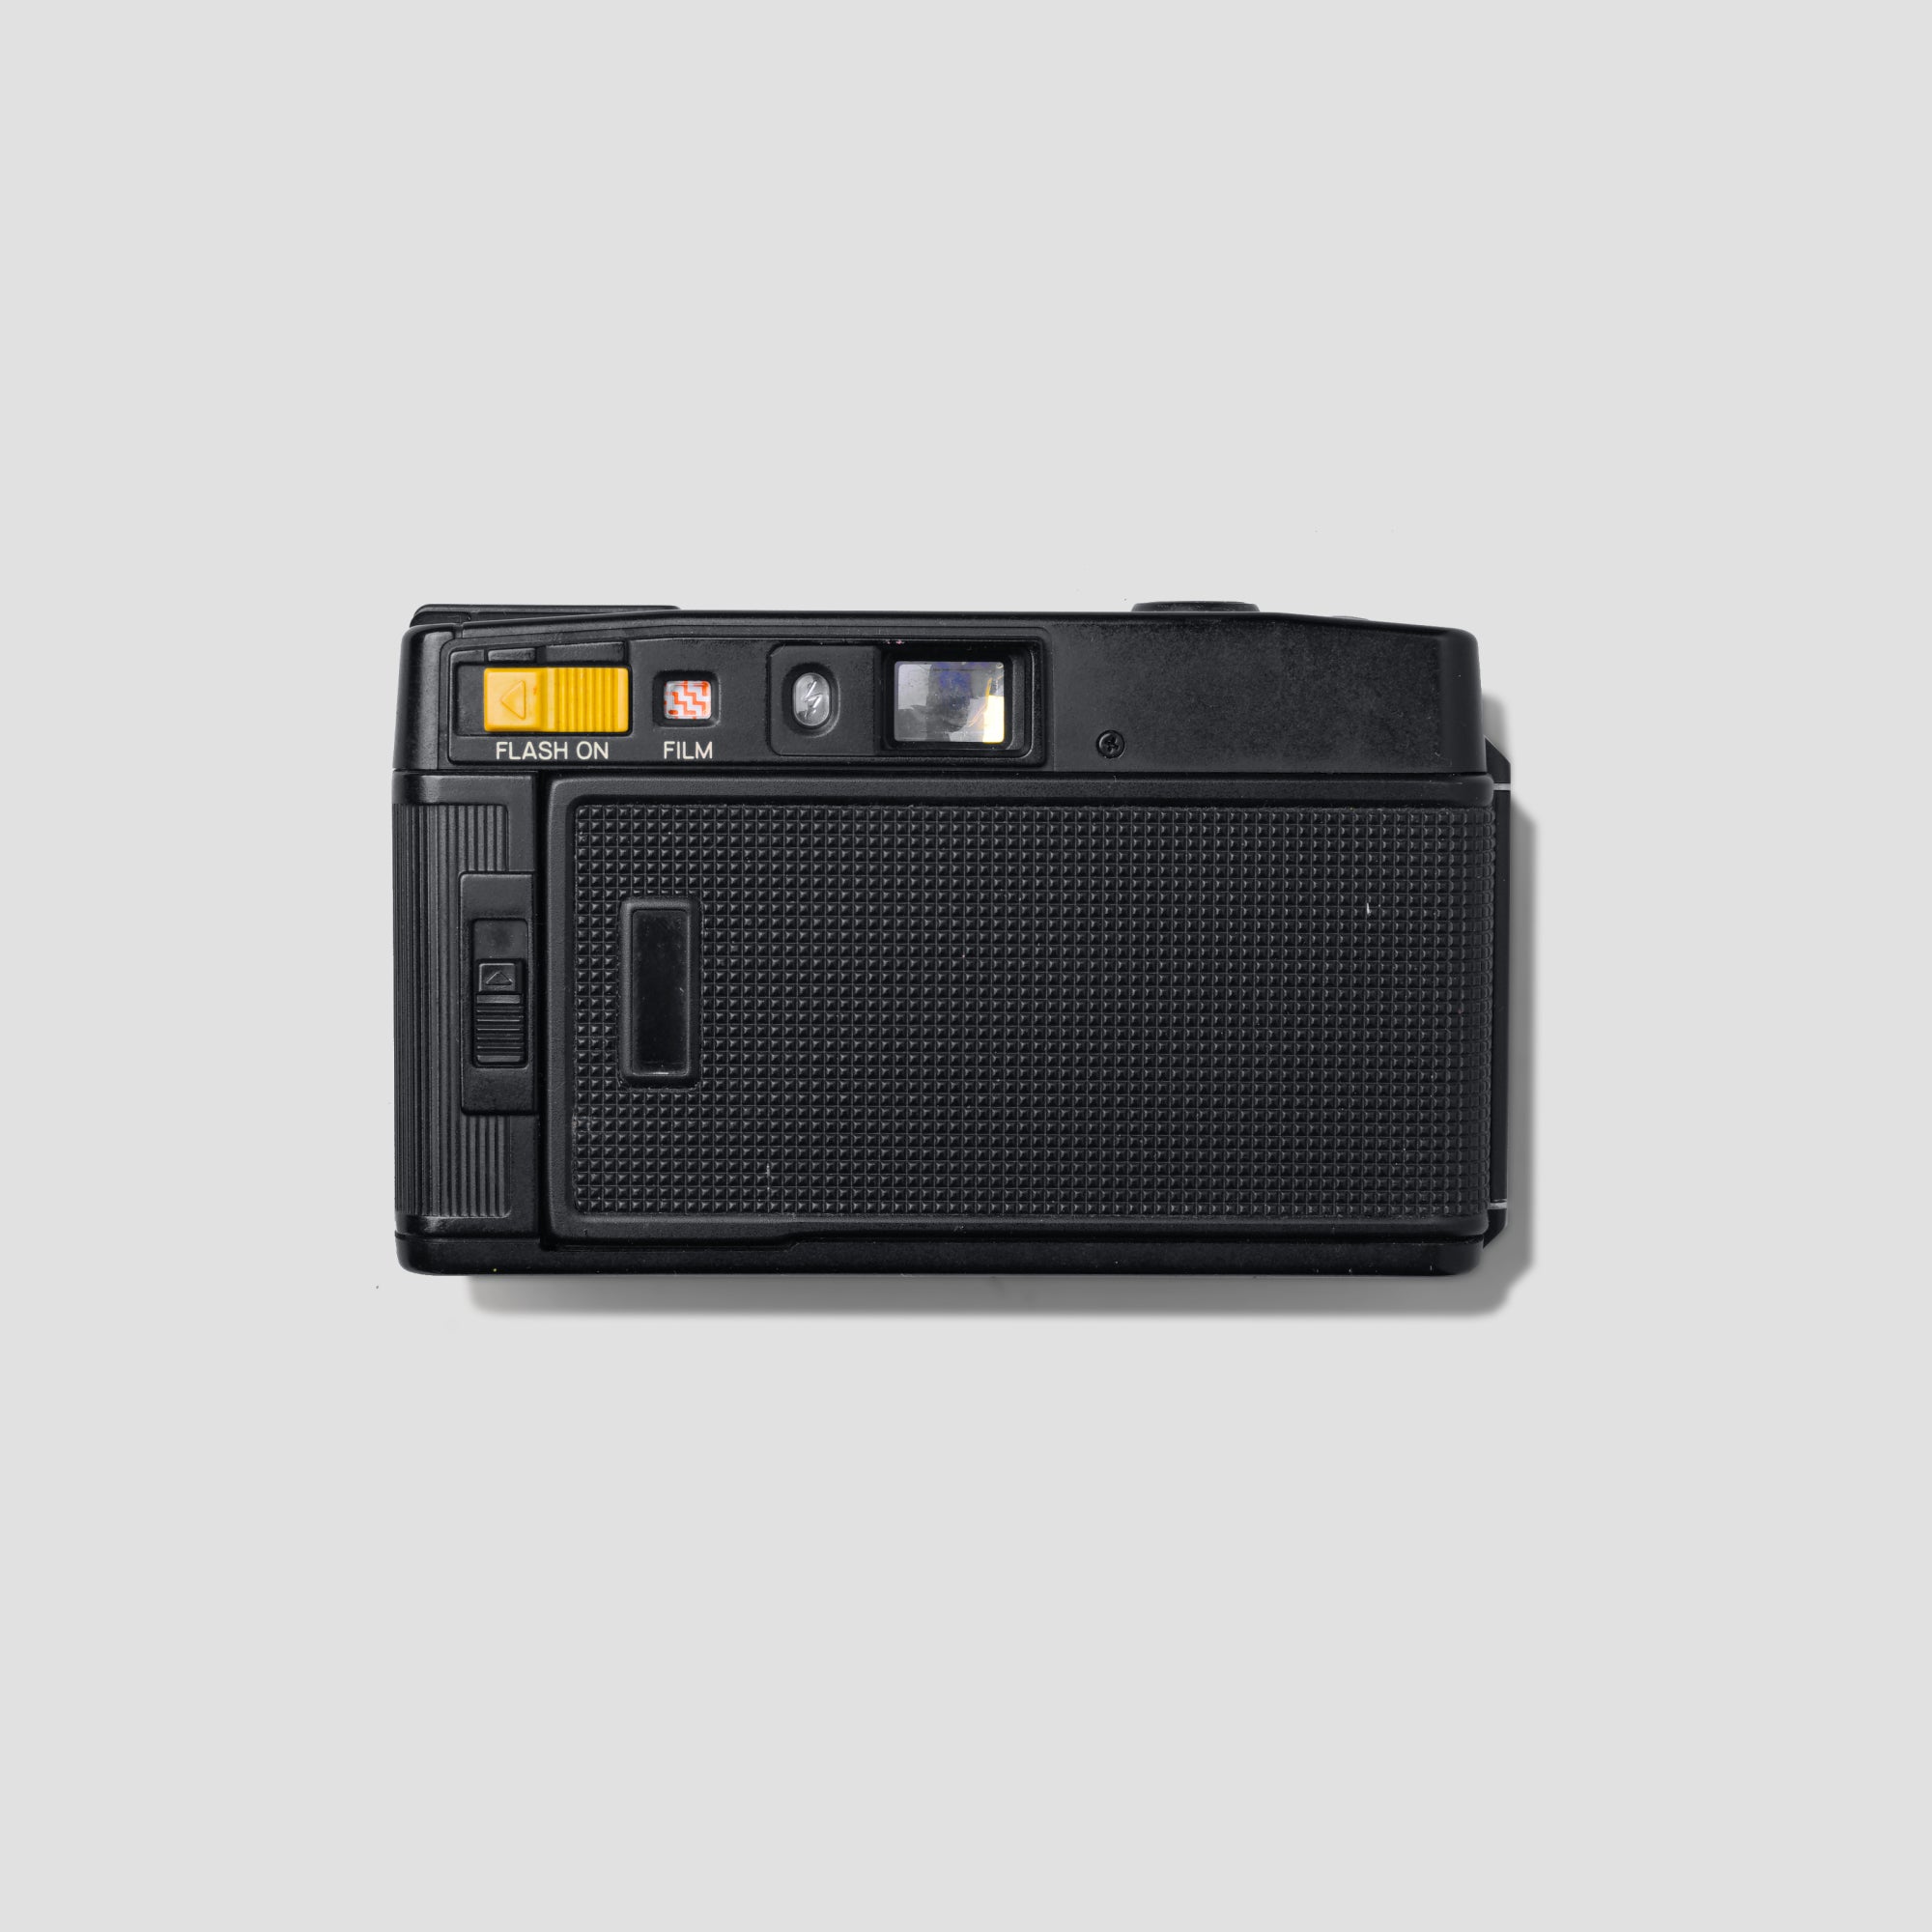 Buy Minolta AF-S now at Analogue Amsterdam